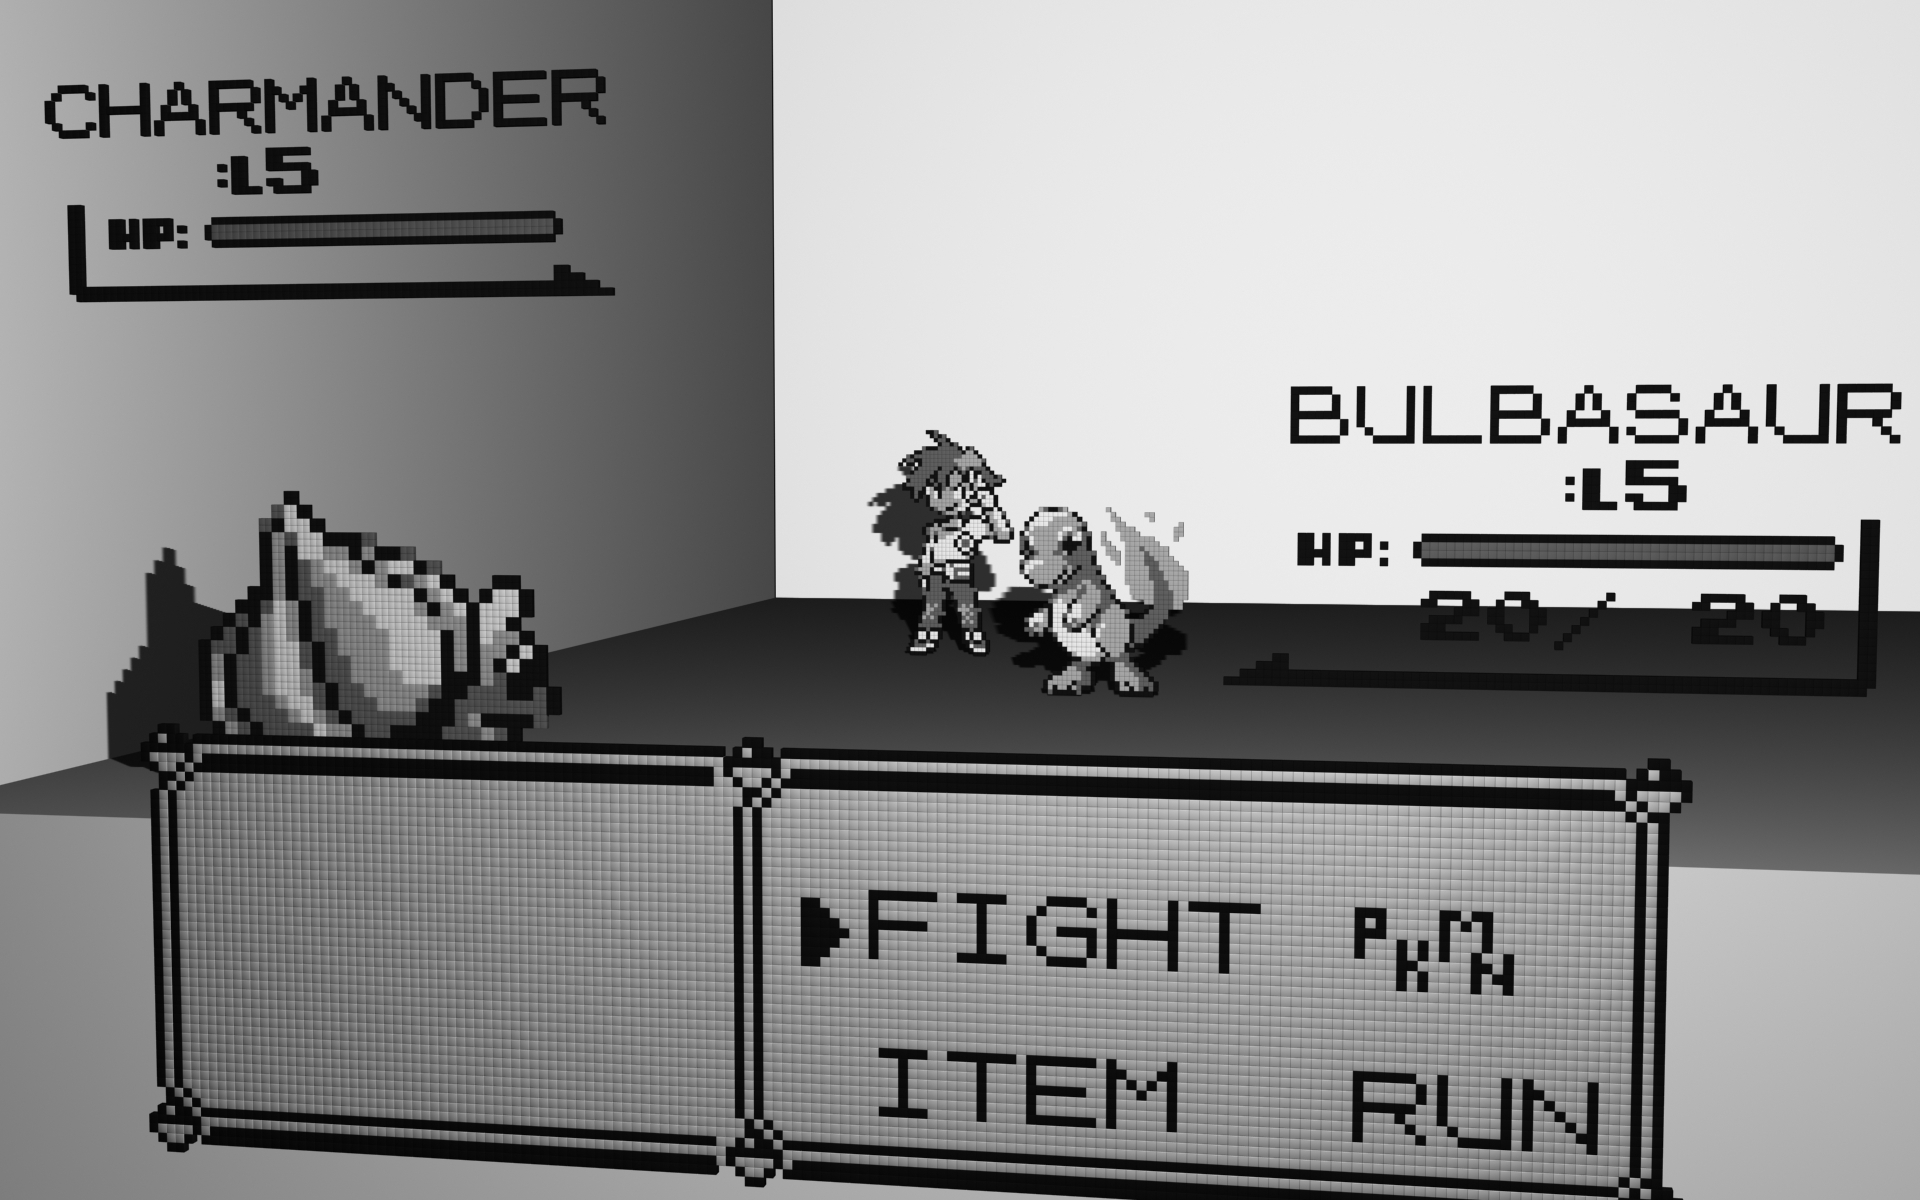 Hd desktop wallpaper featuring Bulbasaur and Charmander from Pokemon Black and White.